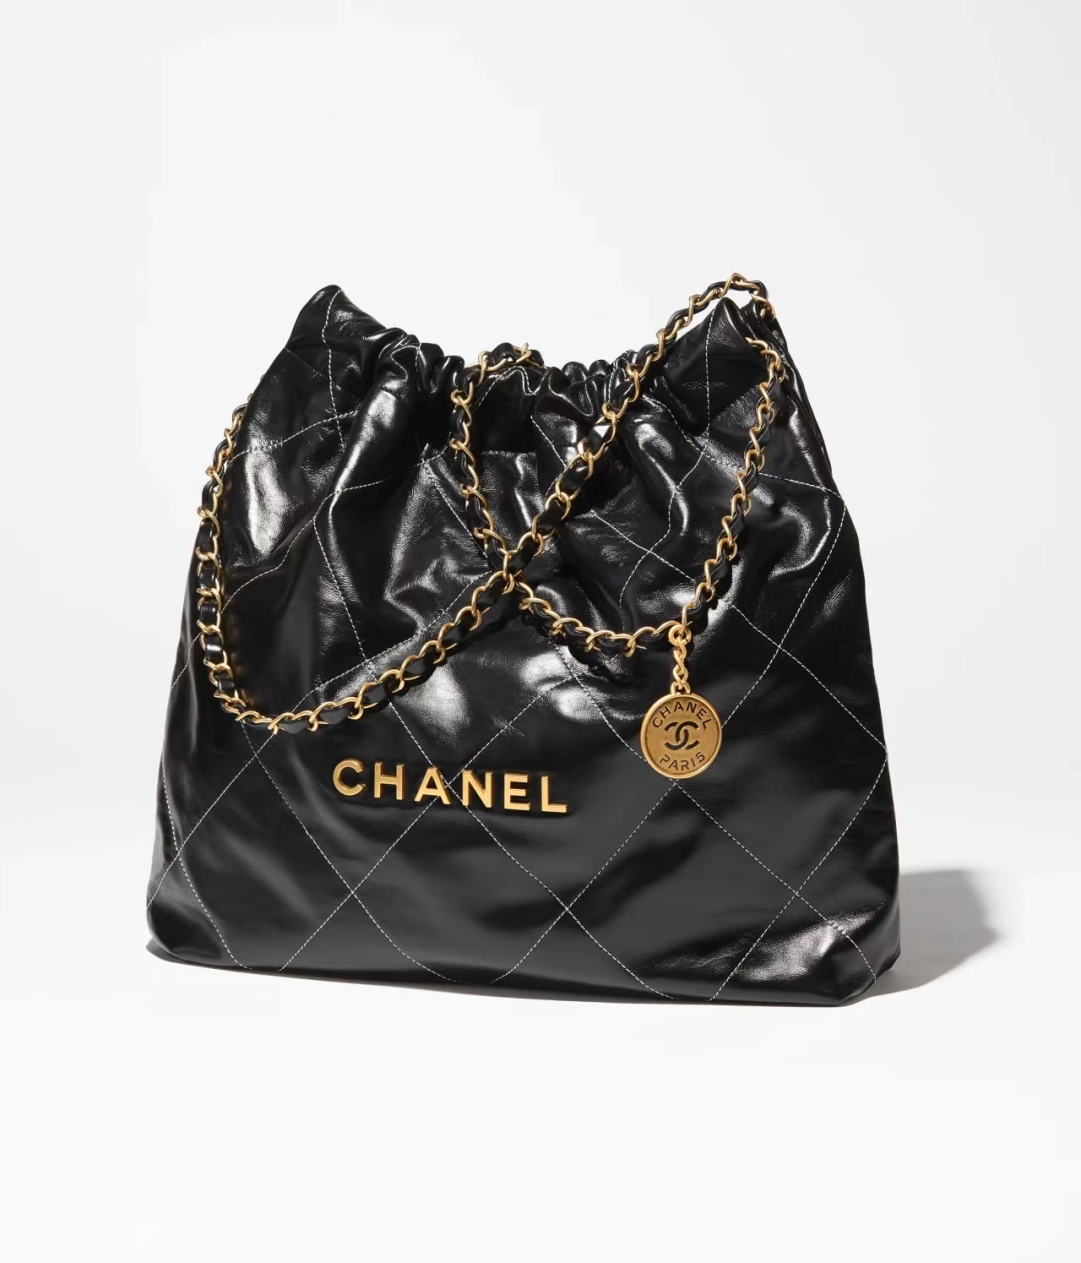 CHANEL 22 bag - Private customized